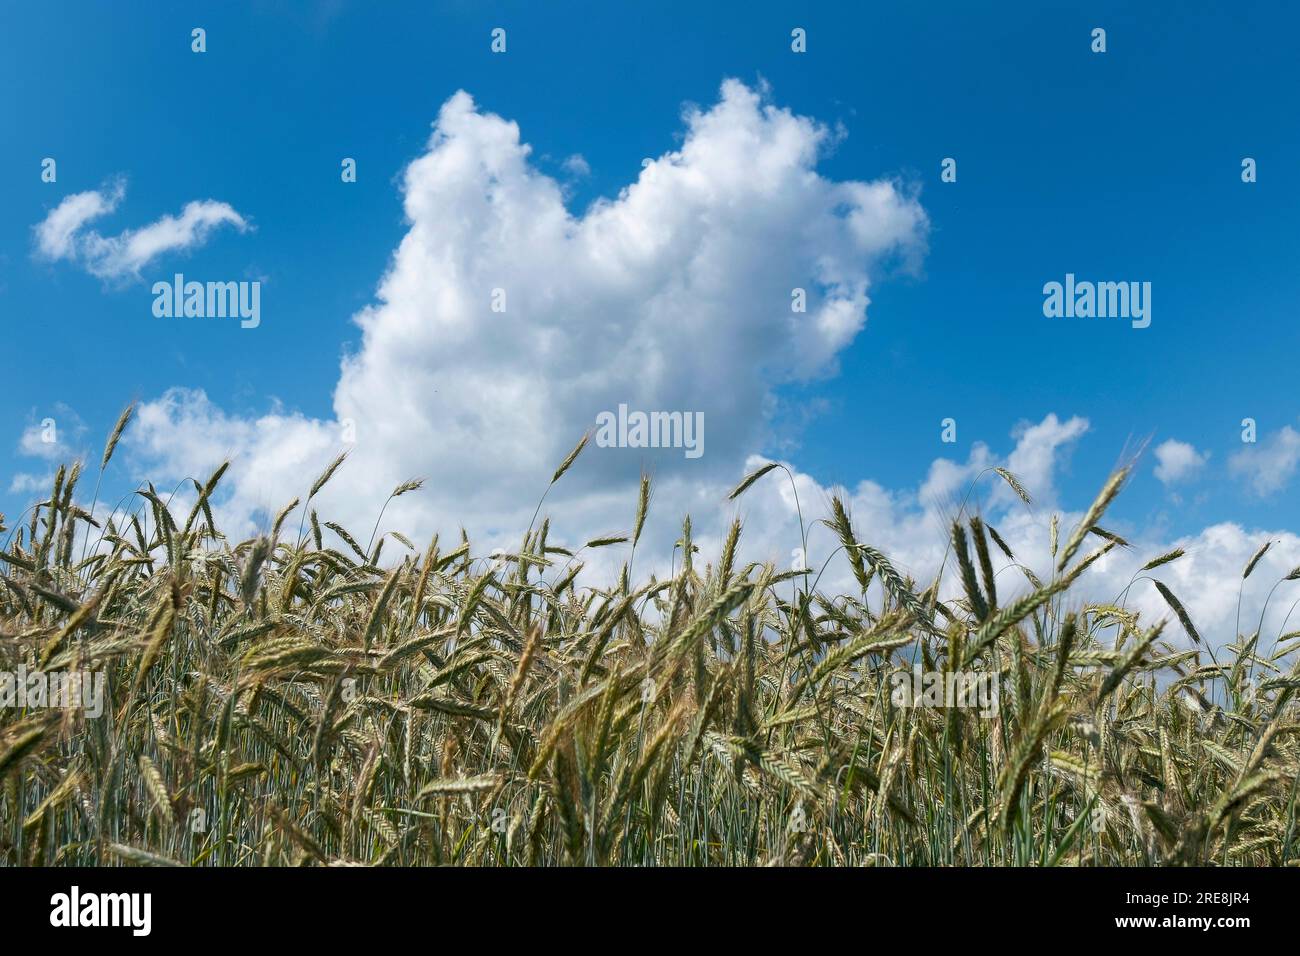 Clouds in a blue sky over a cornfield on a summer day Stock Photo